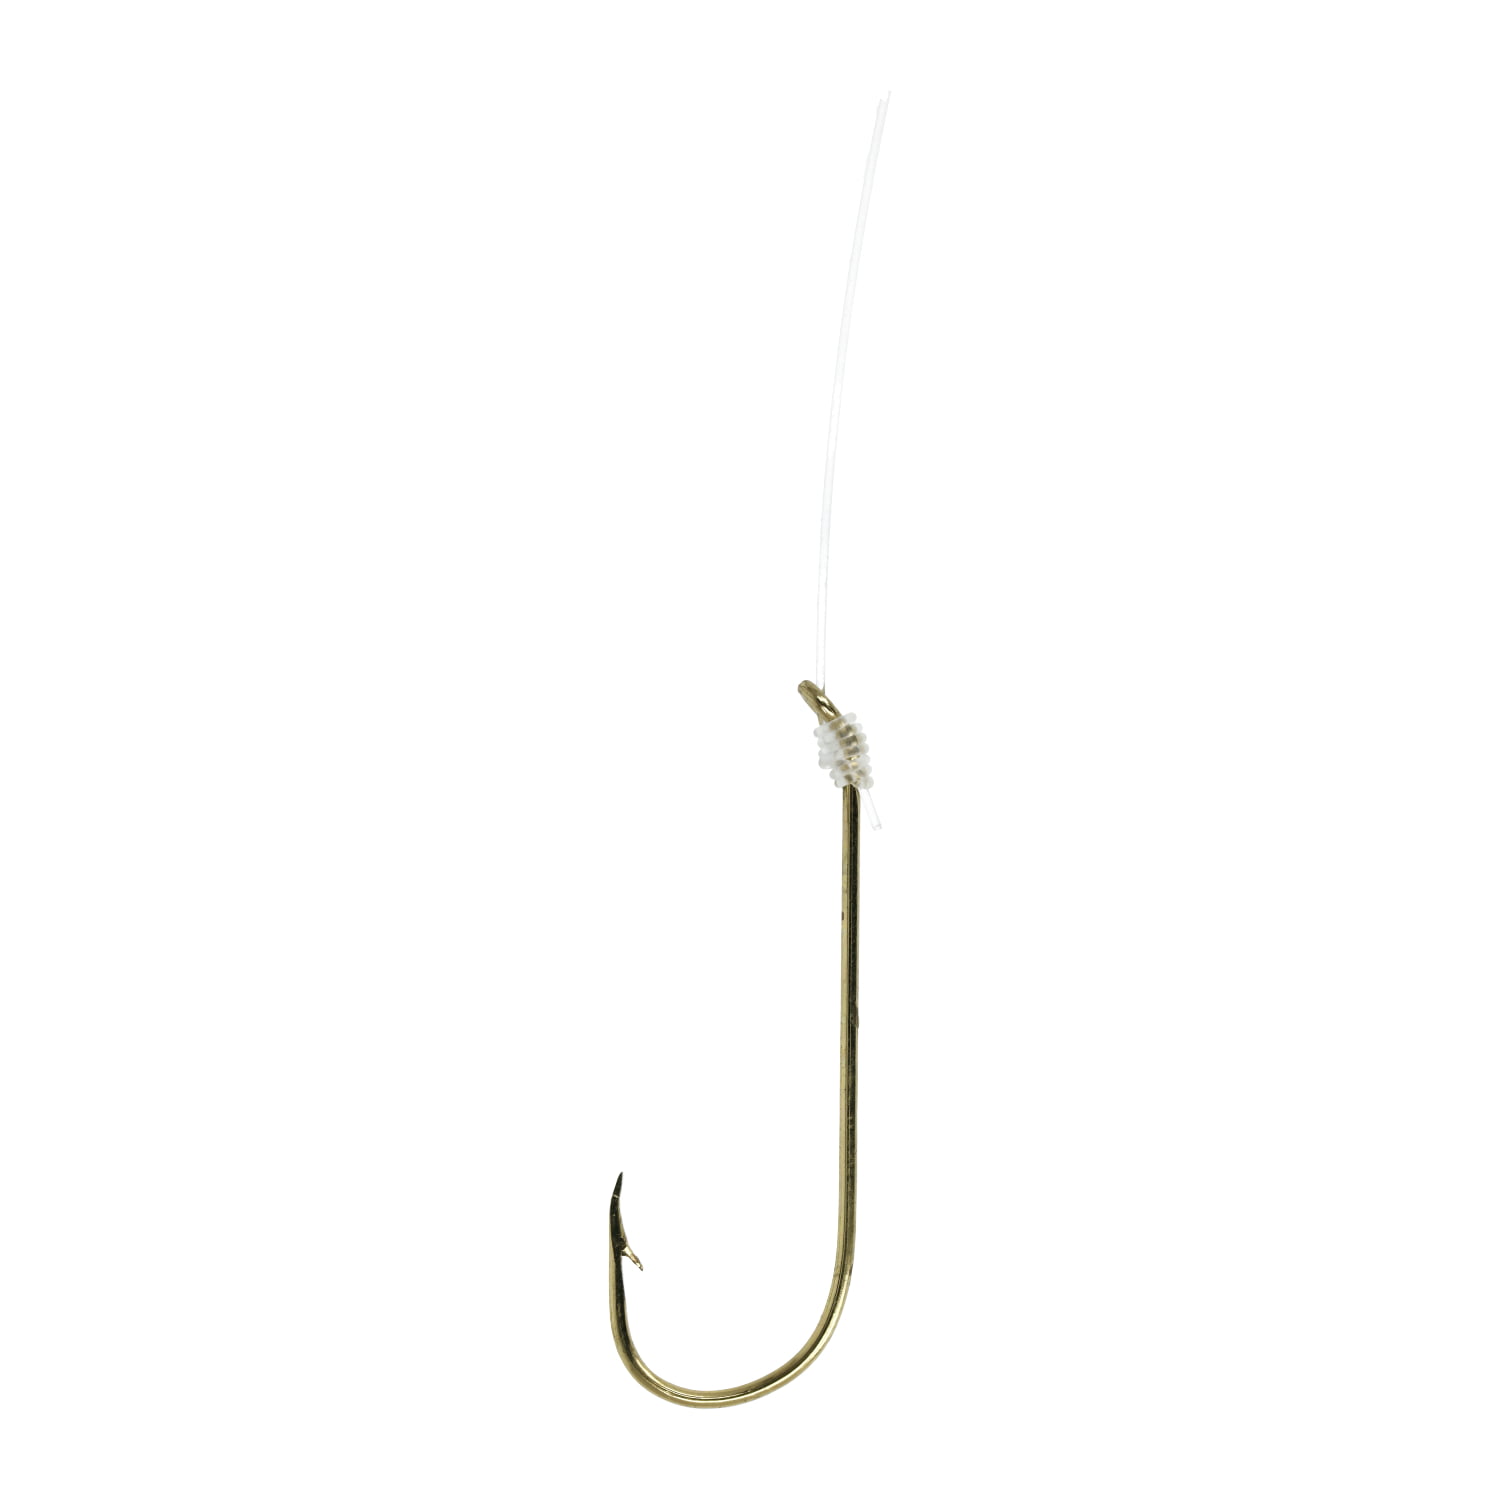 3 PACKS OF JEROS TACKLE ABERDEEN SNELLED HOOKS SIZE 2 GOLD 68AG 